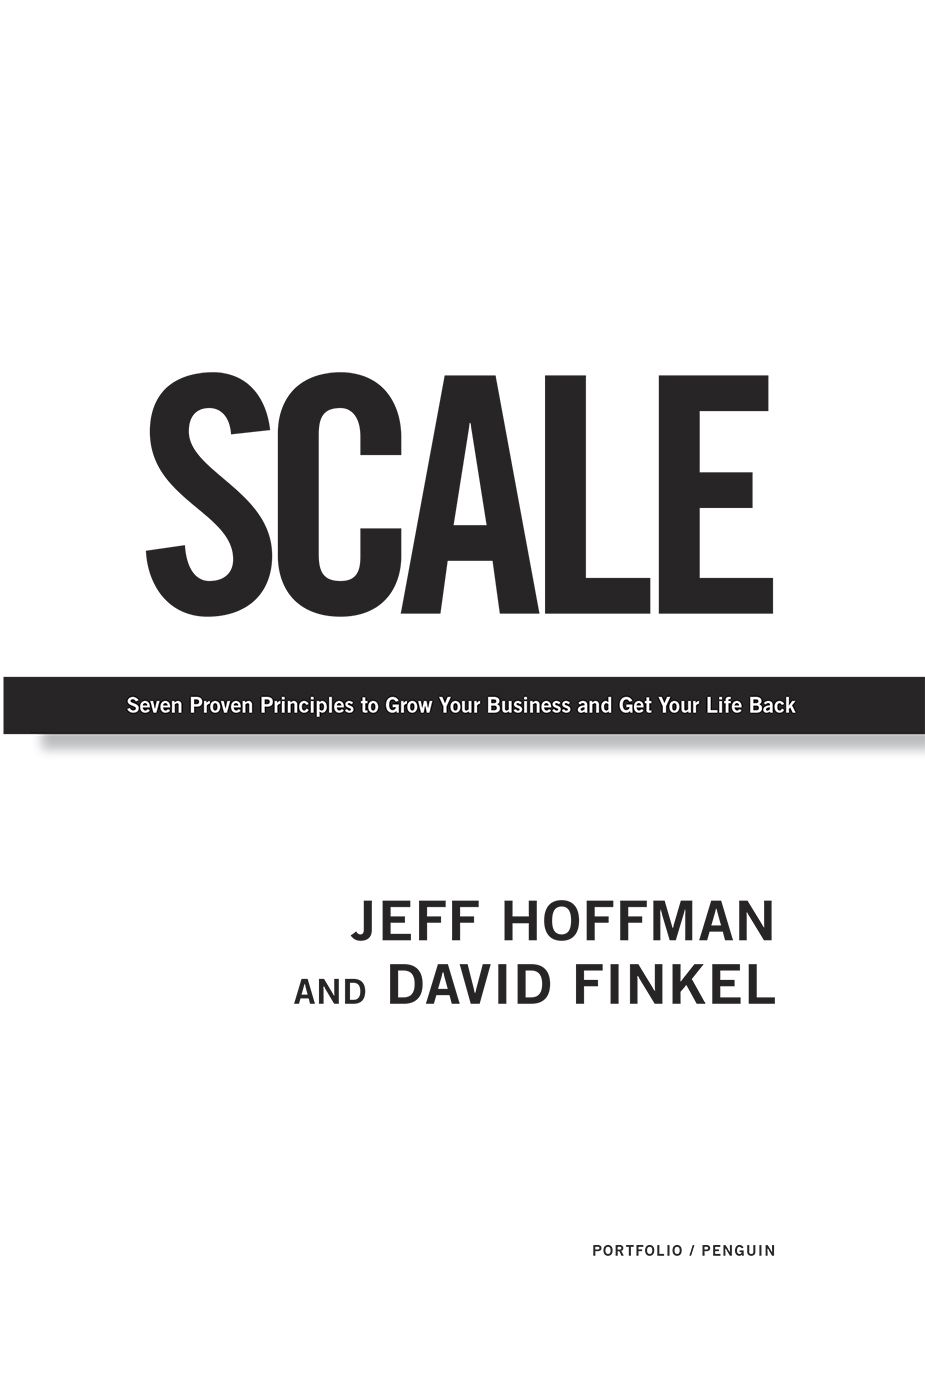 Scale Seven Proven Principles to Grow Your Business and Get Your Life Back - image 1